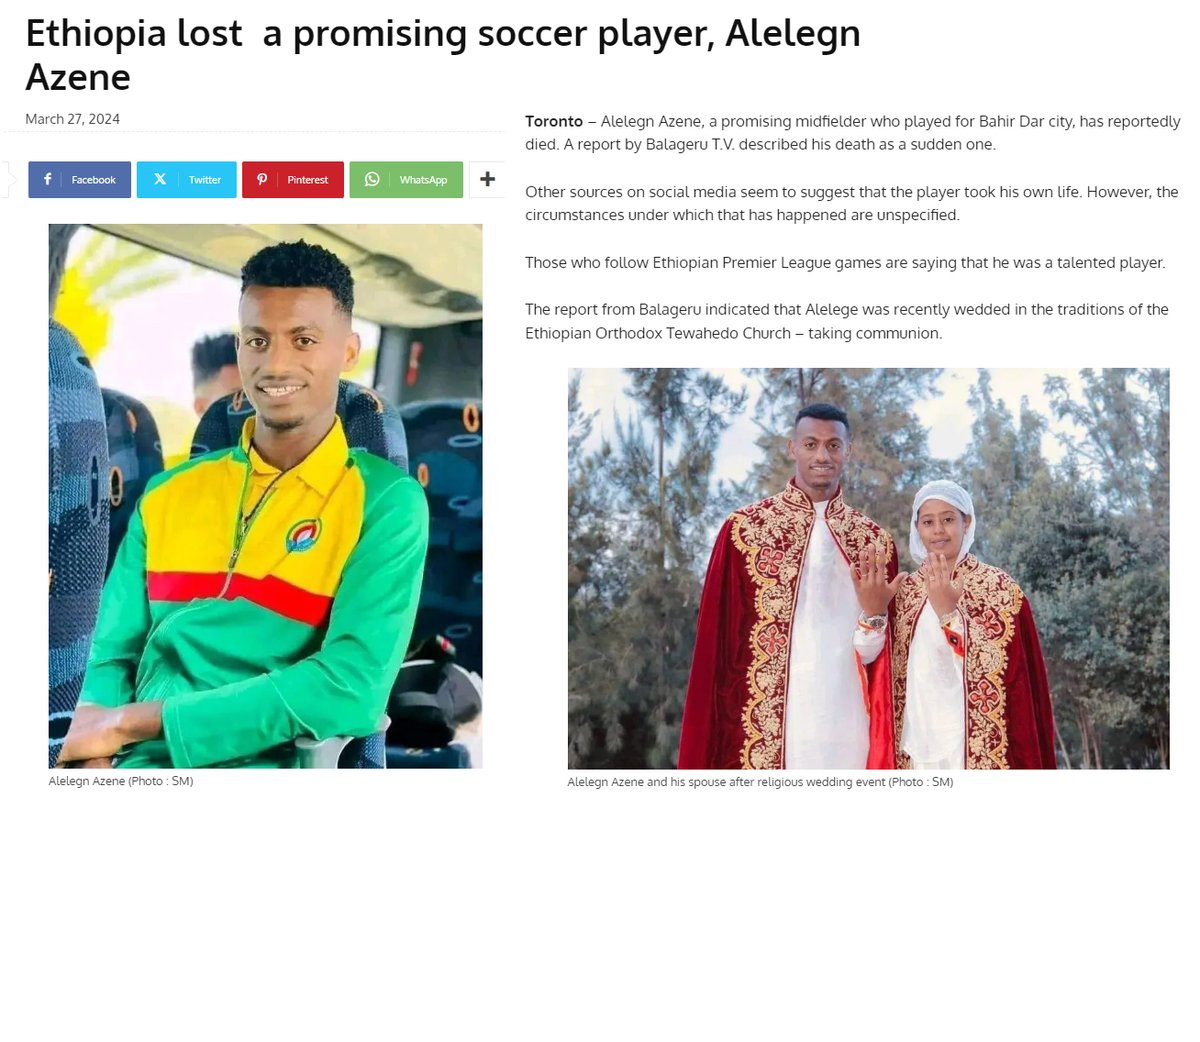 26 year old Ethiopian soccer player Alelegn Azene died suddenly on March 27, 2024.

He had recently gotten married

The circumstances of his sudden death are unclear.

#DiedSuddenly